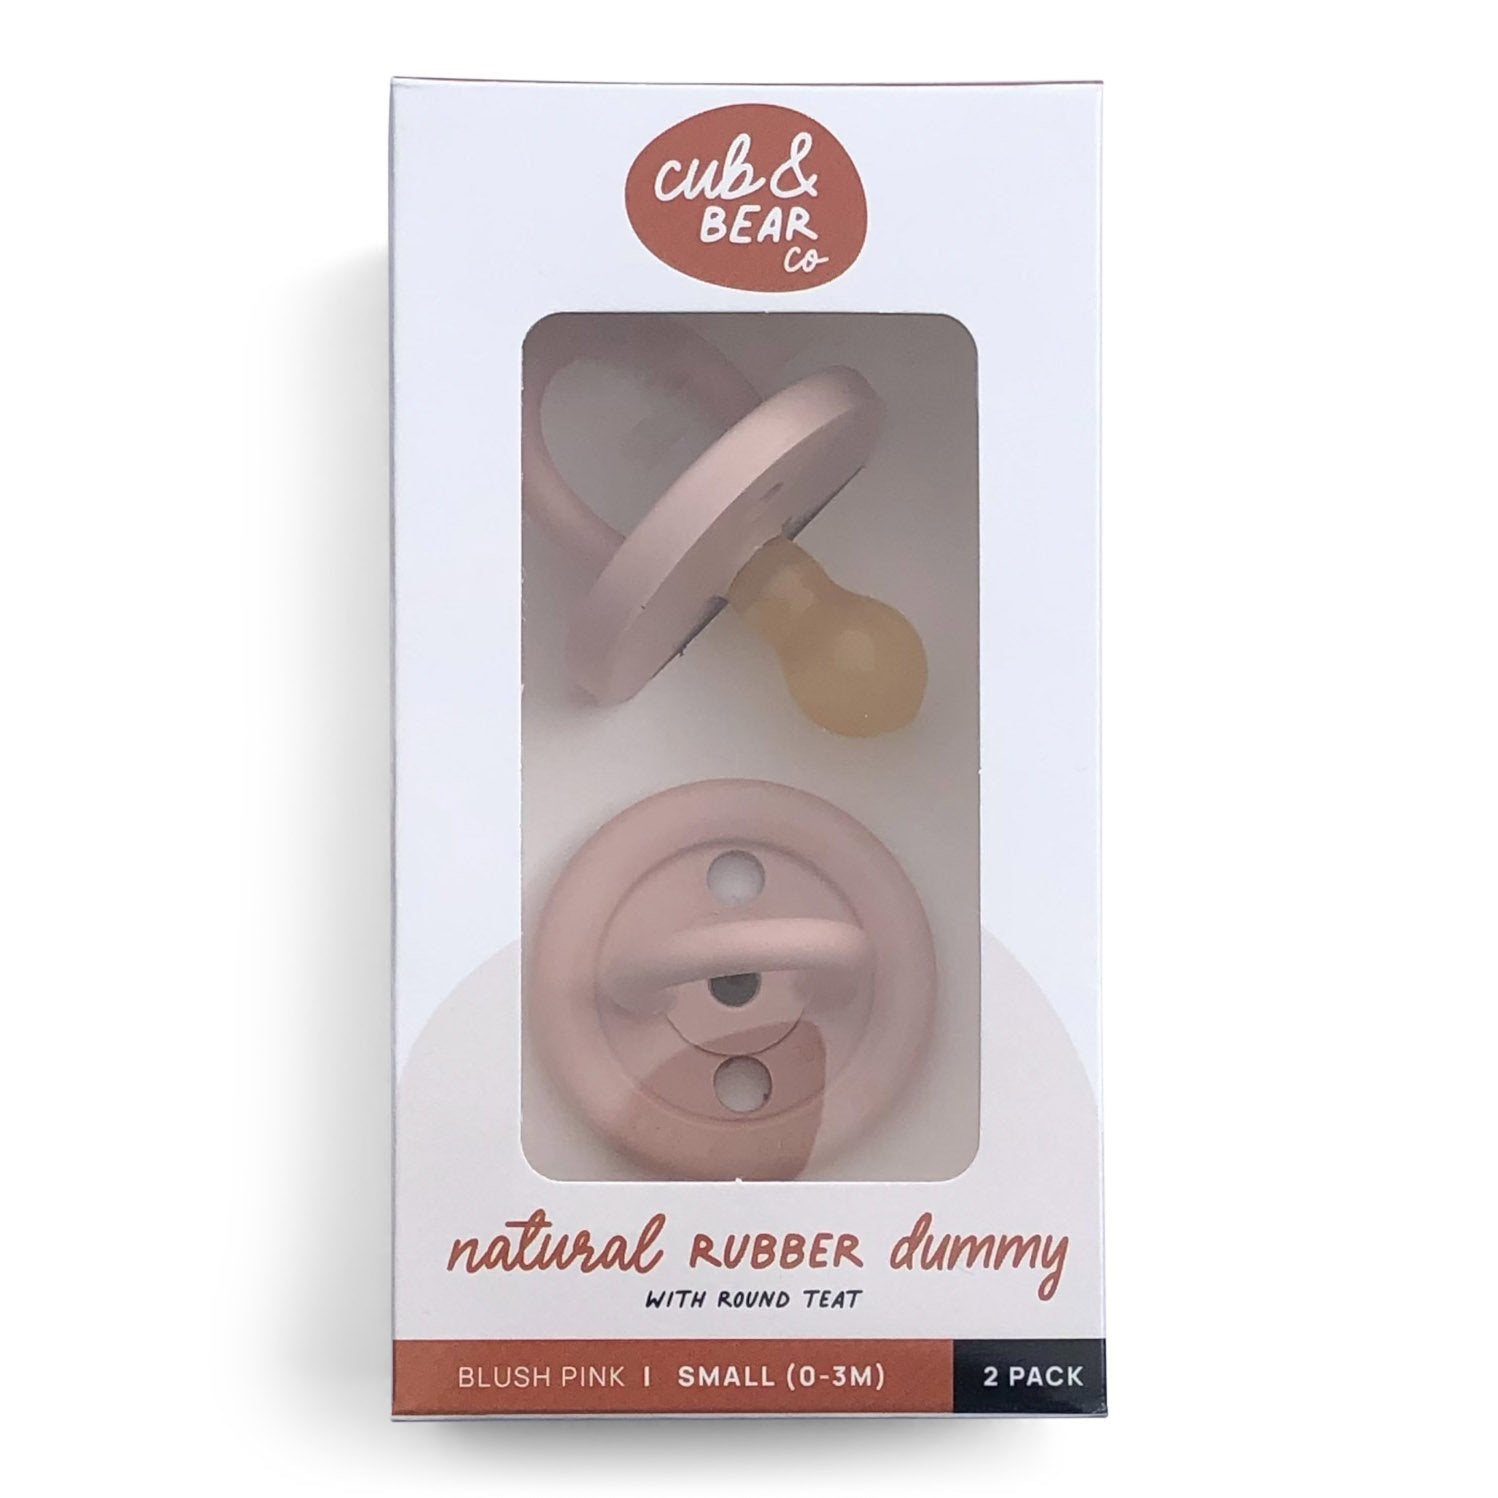 Blush Pink Natural Rubber Dummy Two Pack - Cub & Bear Co.